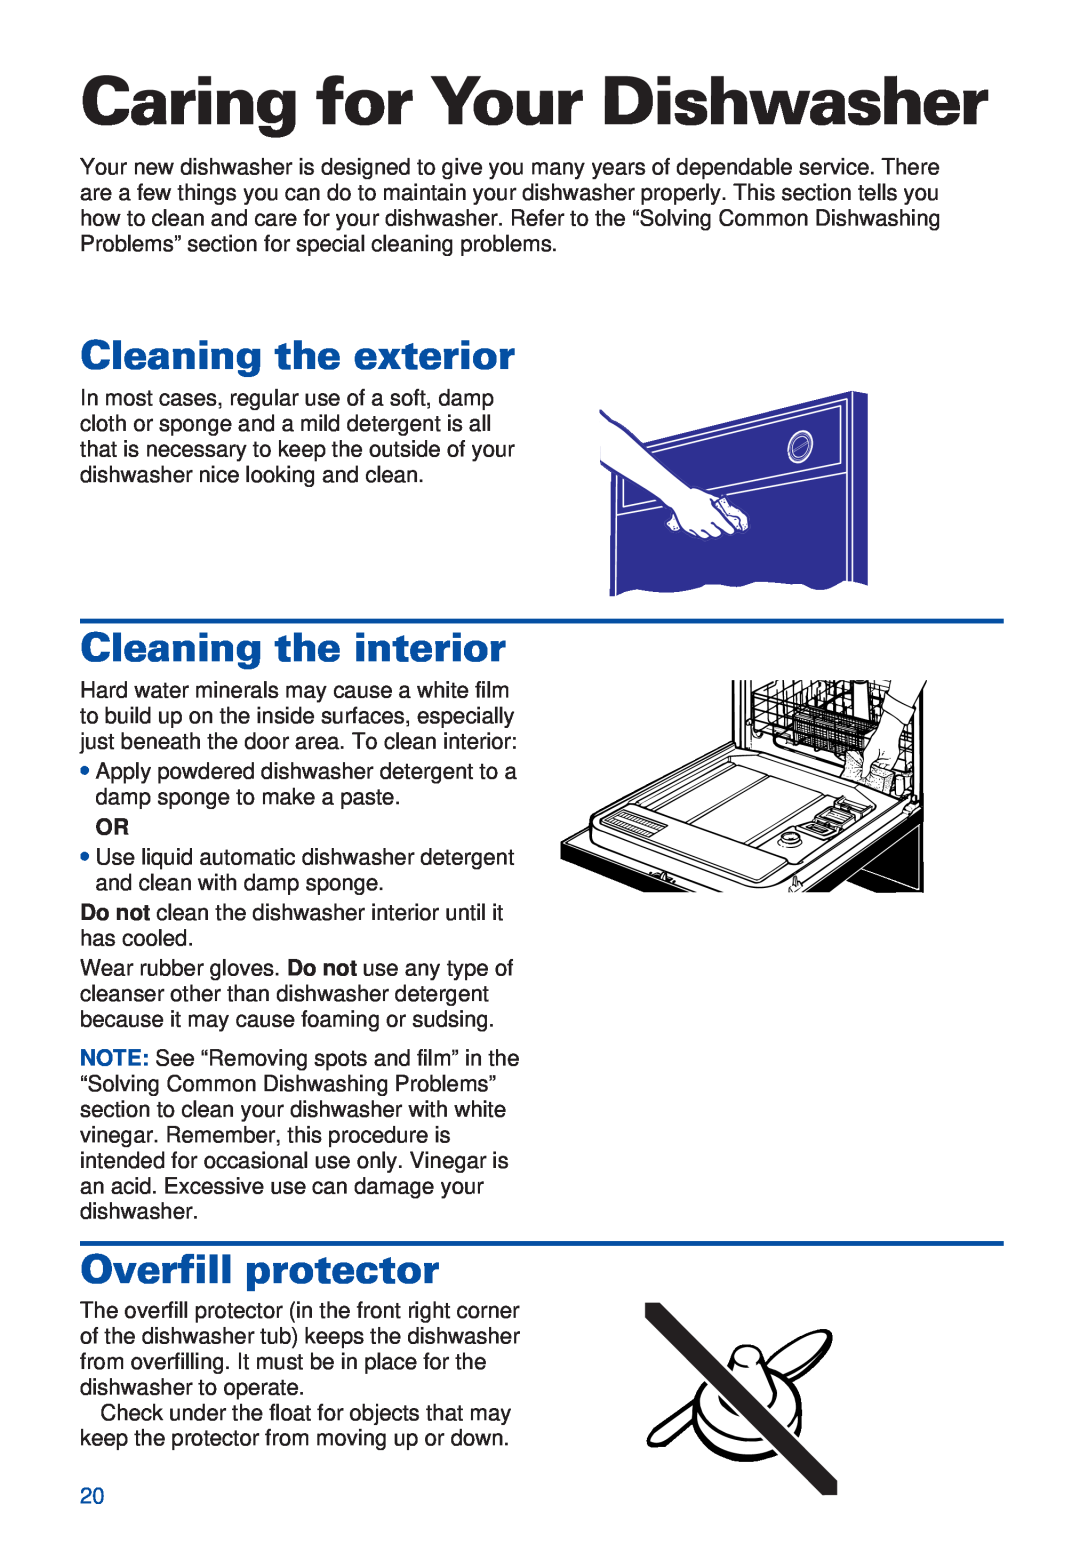 Estate TUD5700, TUD4000 Caring for Your Dishwasher, Cleaning the exterior, Cleaning the interior, Overfill protector 